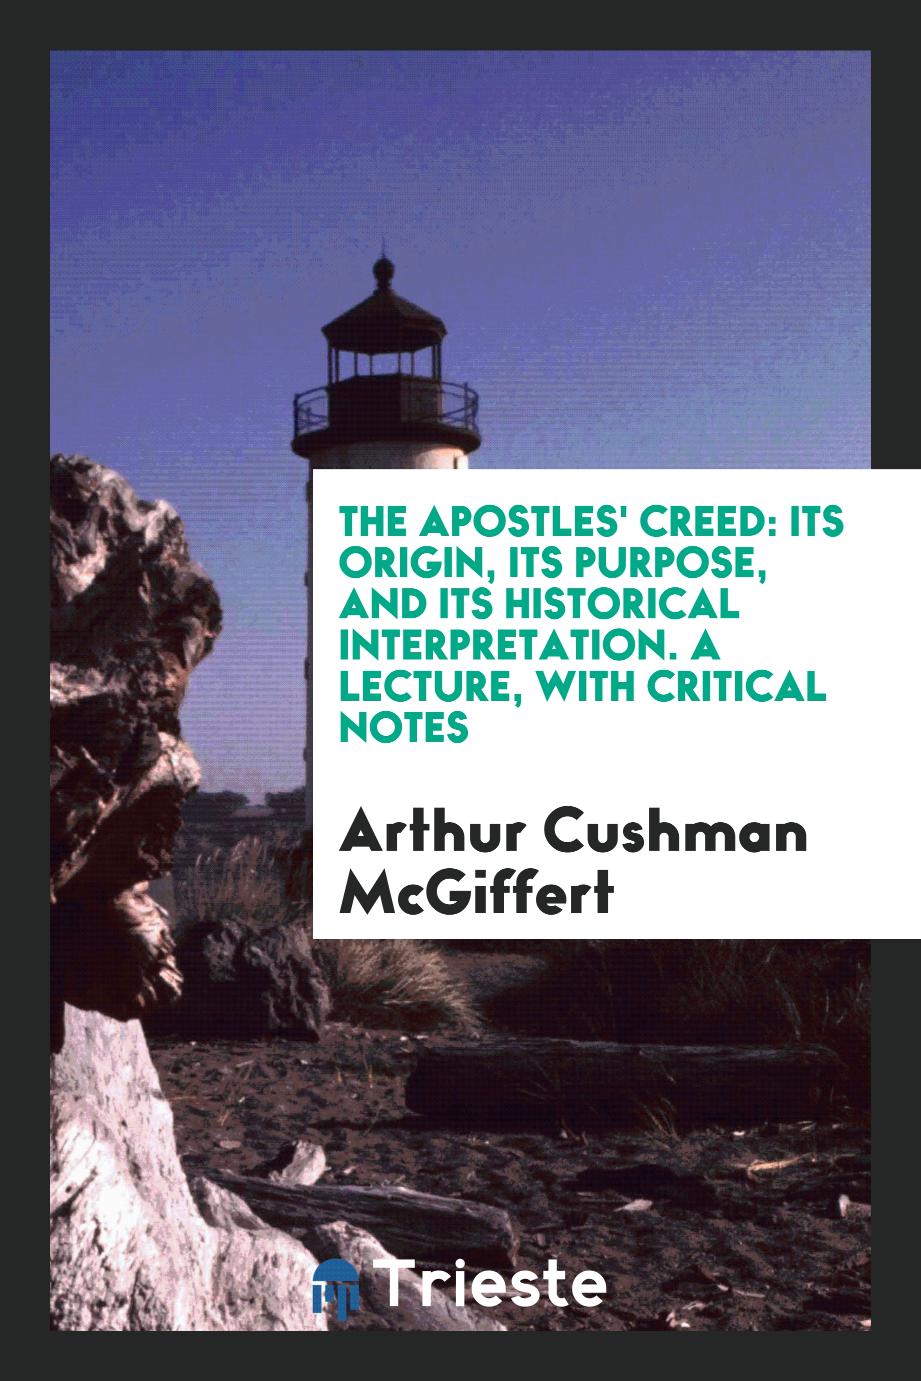 The Apostles' Creed: Its Origin, Its Purpose, and Its Historical Interpretation. A Lecture, with Critical Notes